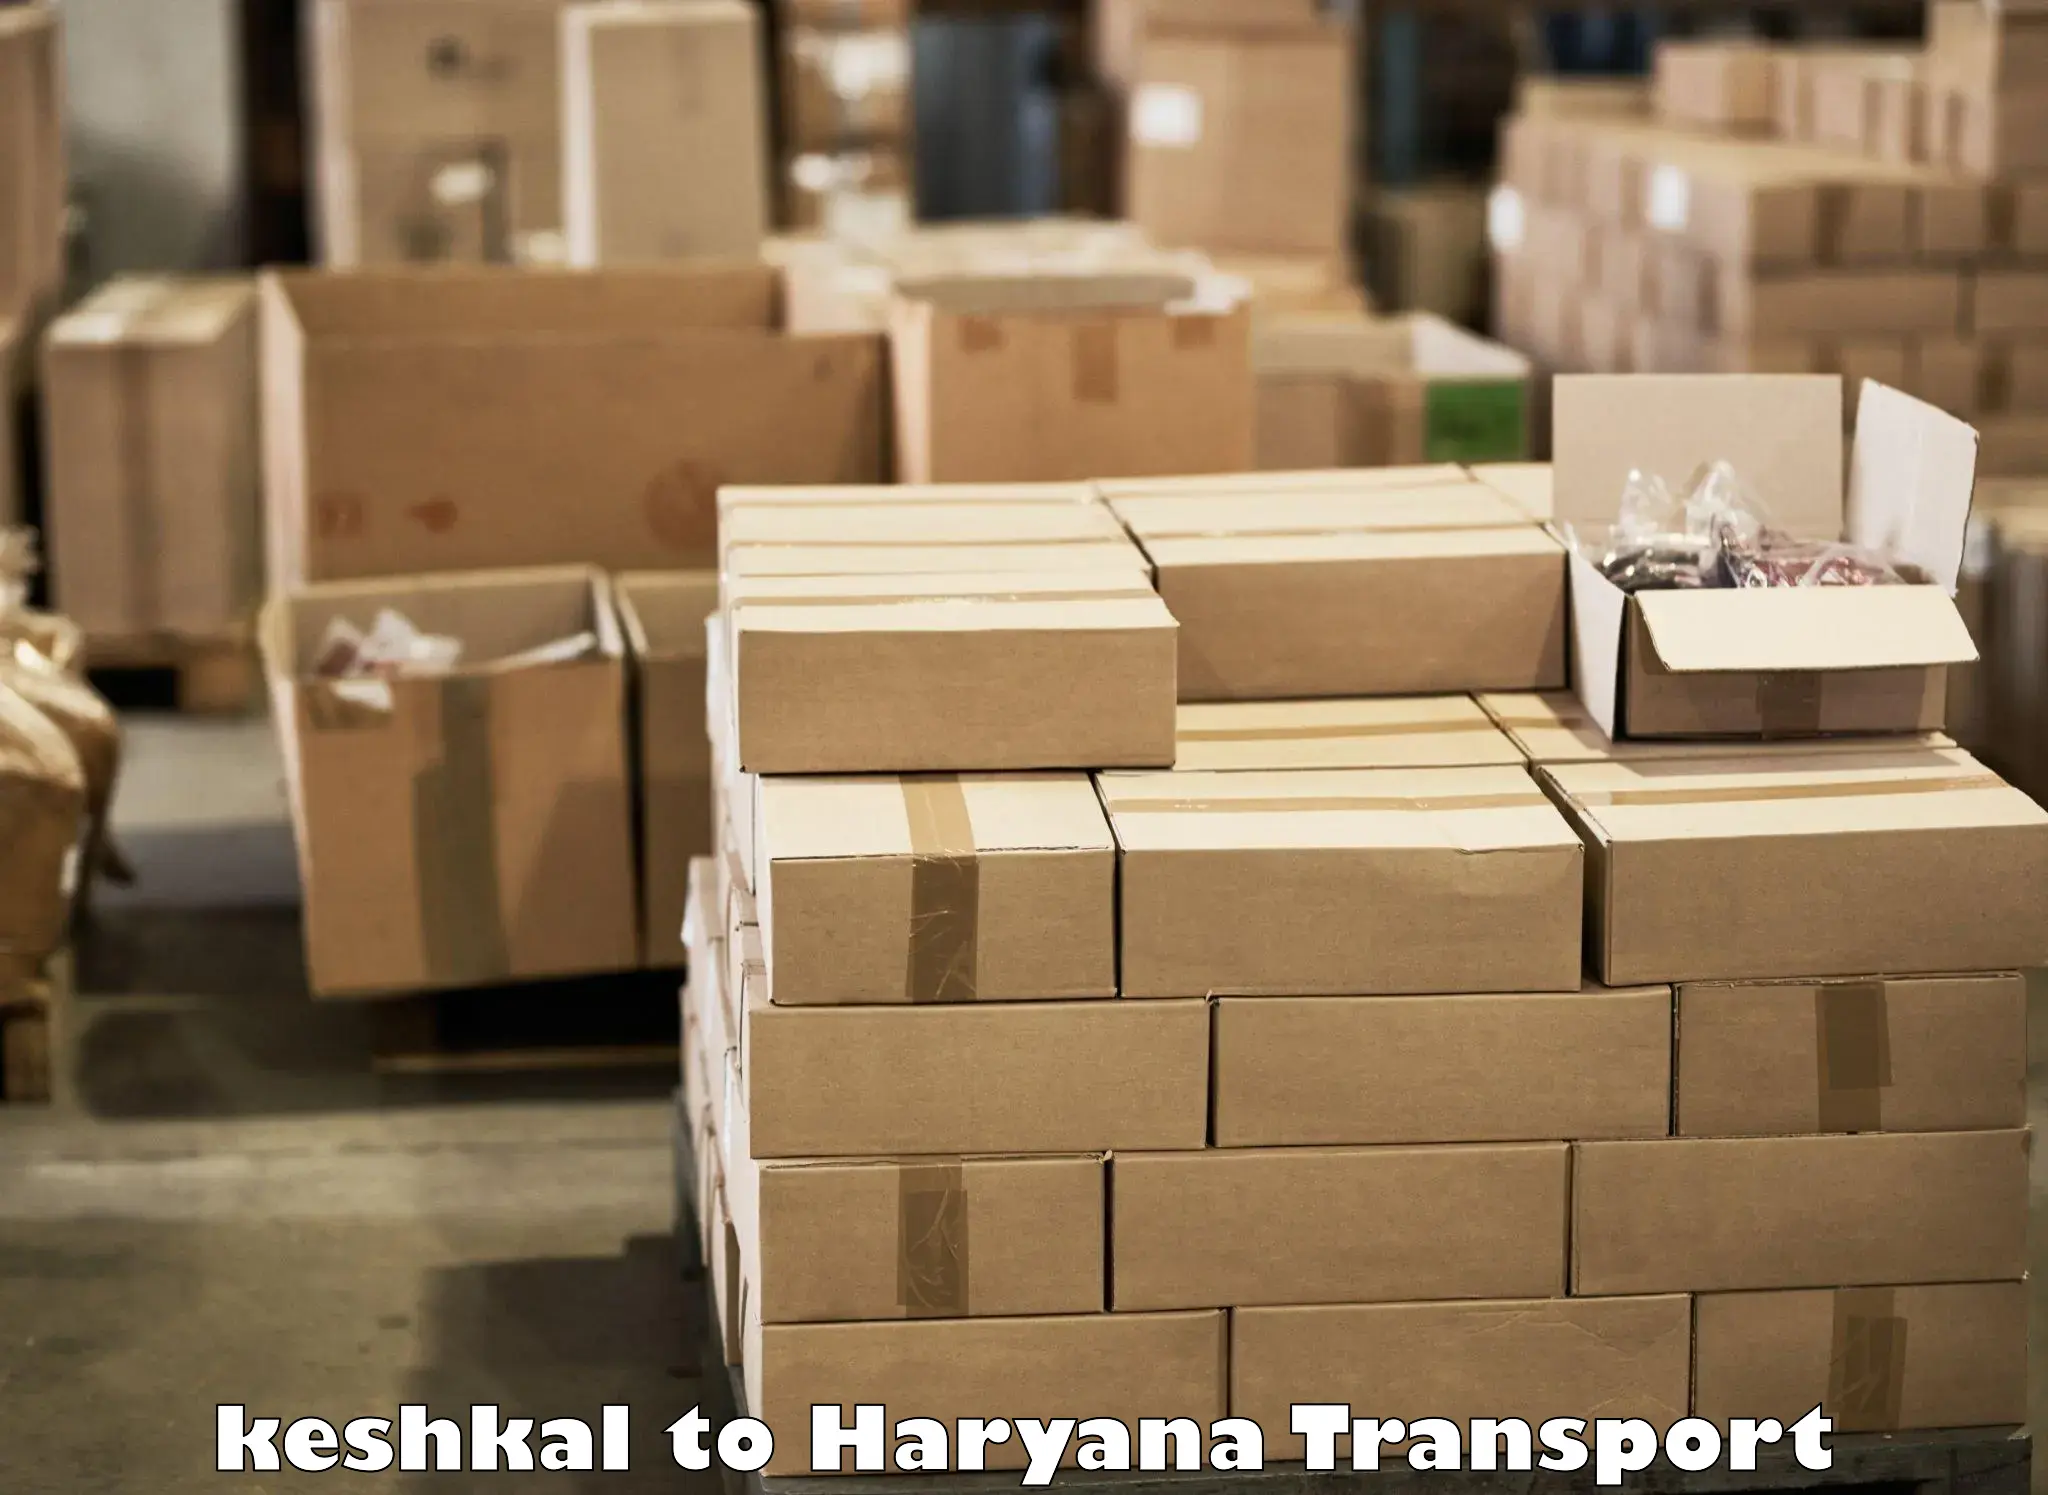 Daily parcel service transport keshkal to Pinjore